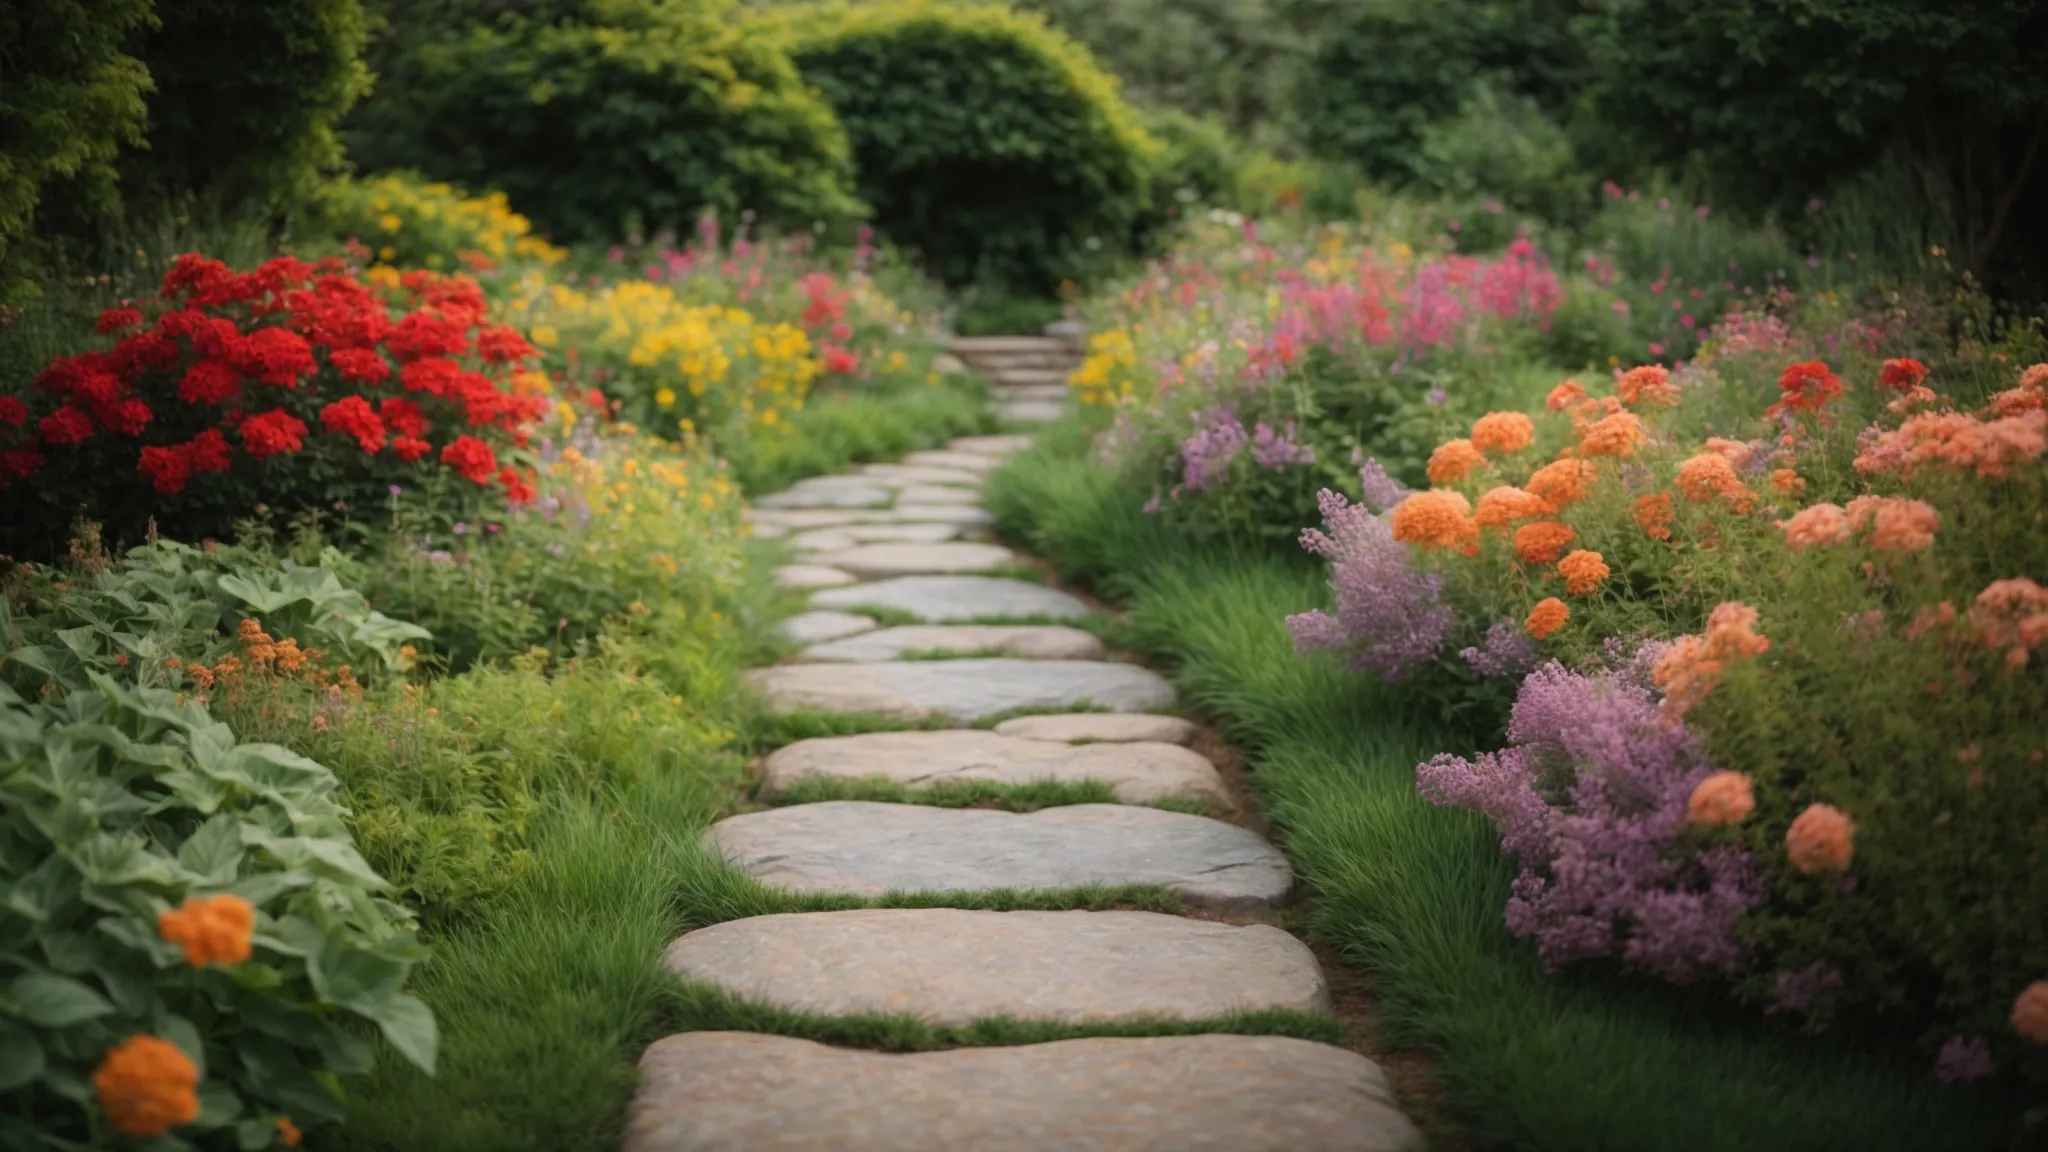 stone pathways weave through lush greenery and colorful flowers, creating a harmonious blend of natural and structured elements in a garden.